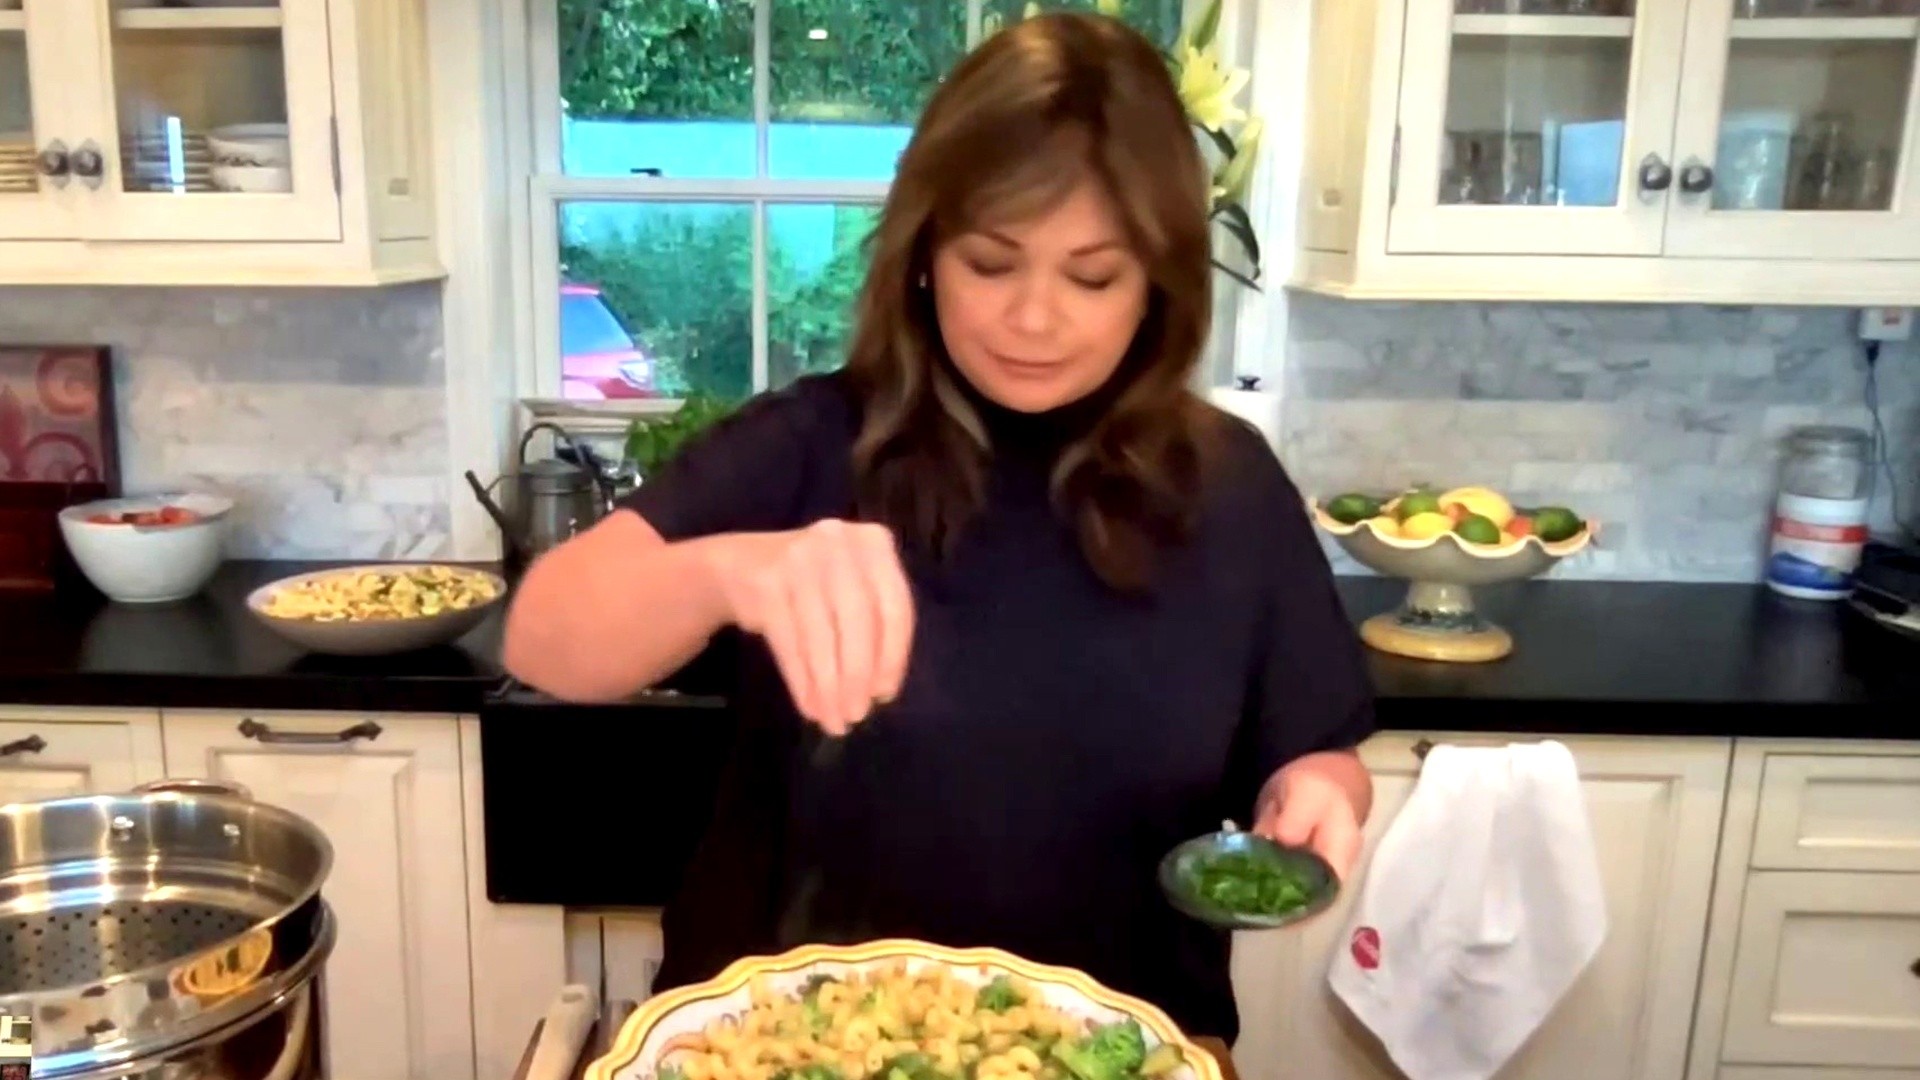 Try this easy summer pasta salad recipe from Valerie Bertinelli